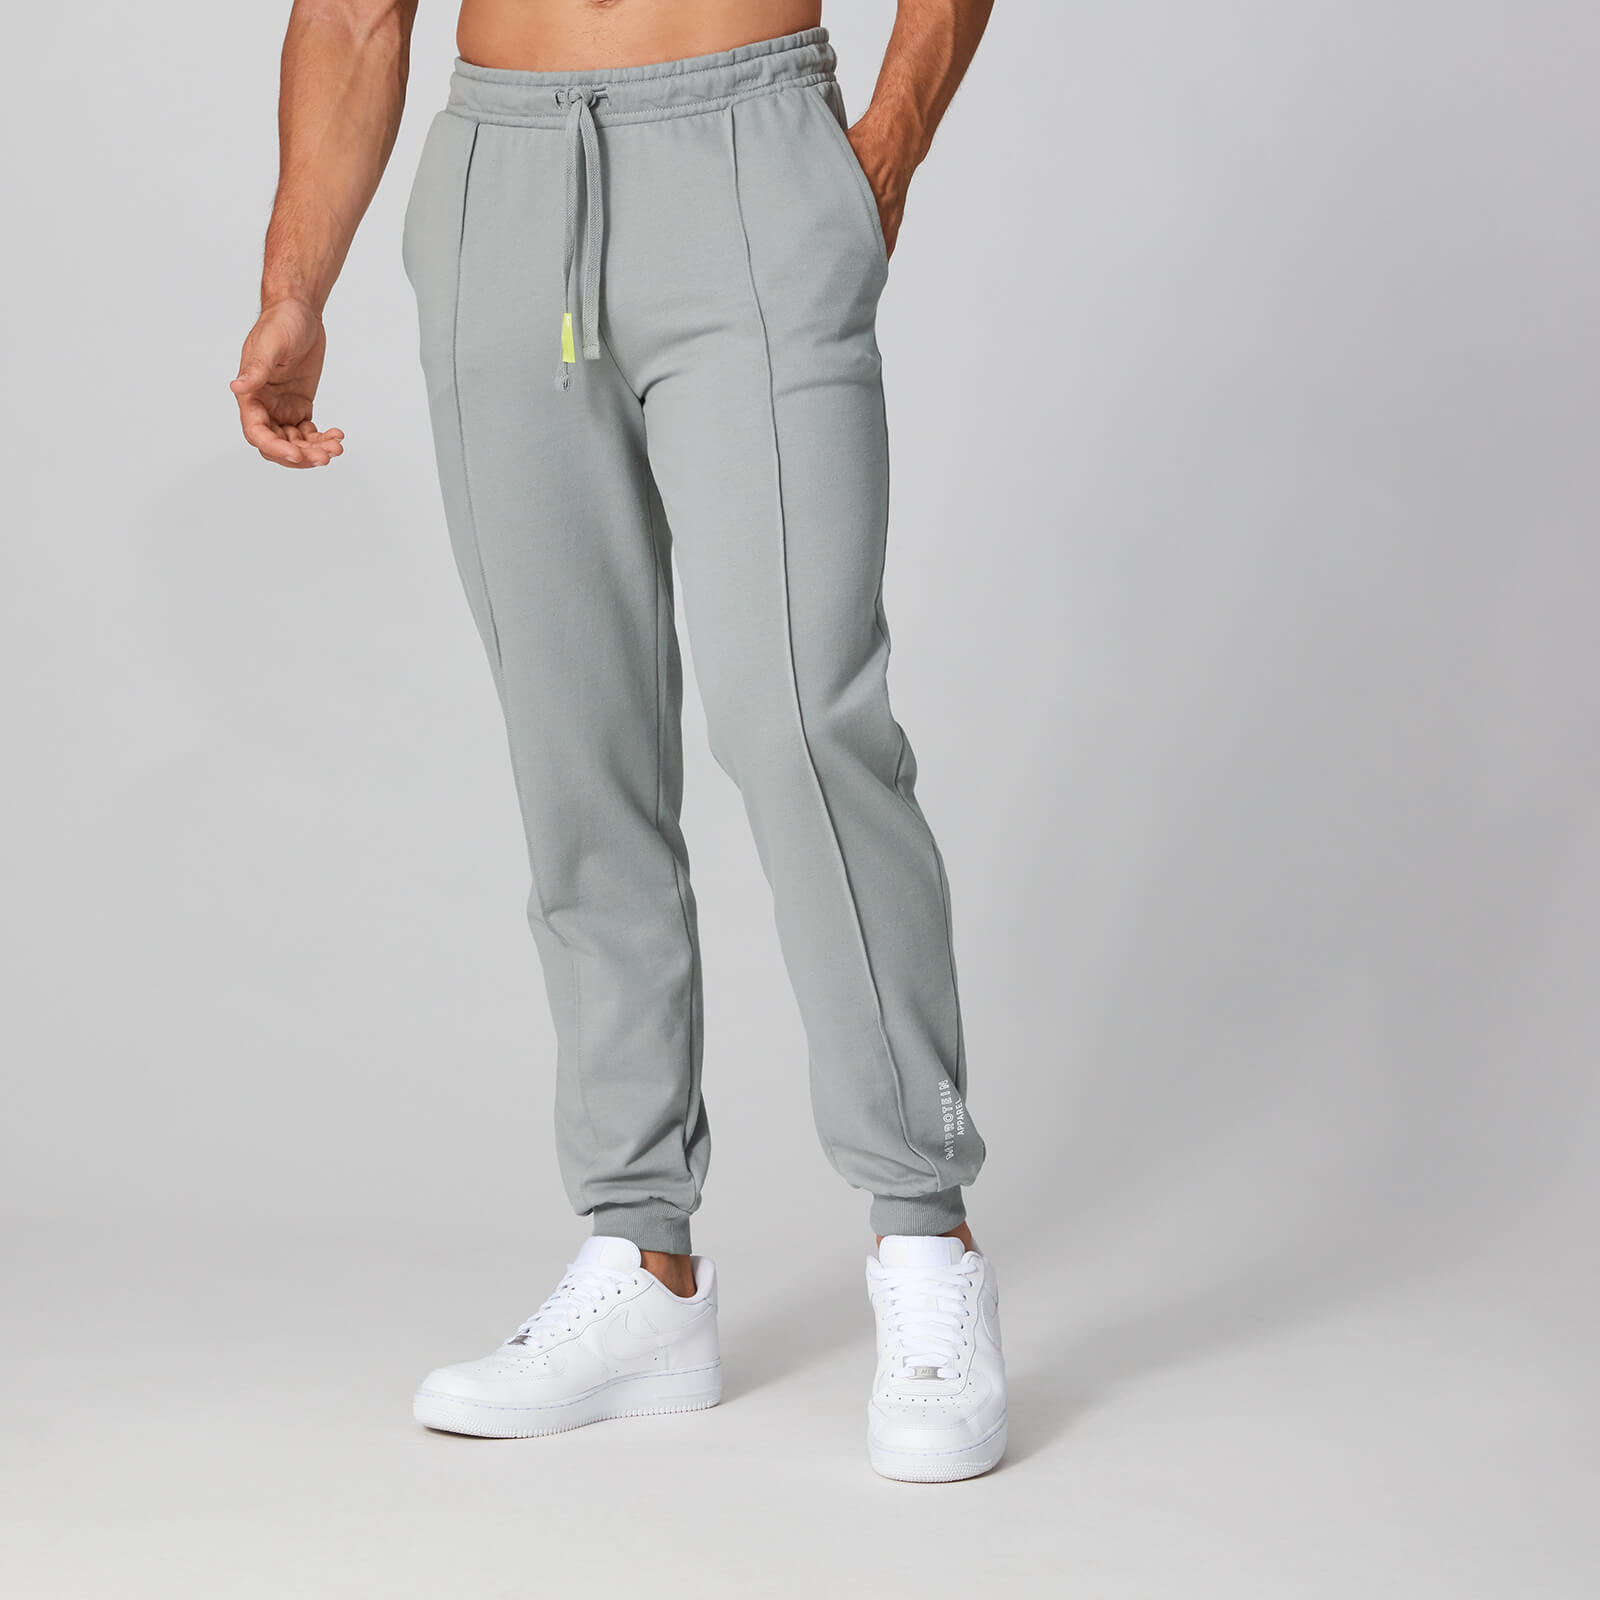 Myprotein Signature Joggers - Alloy - S